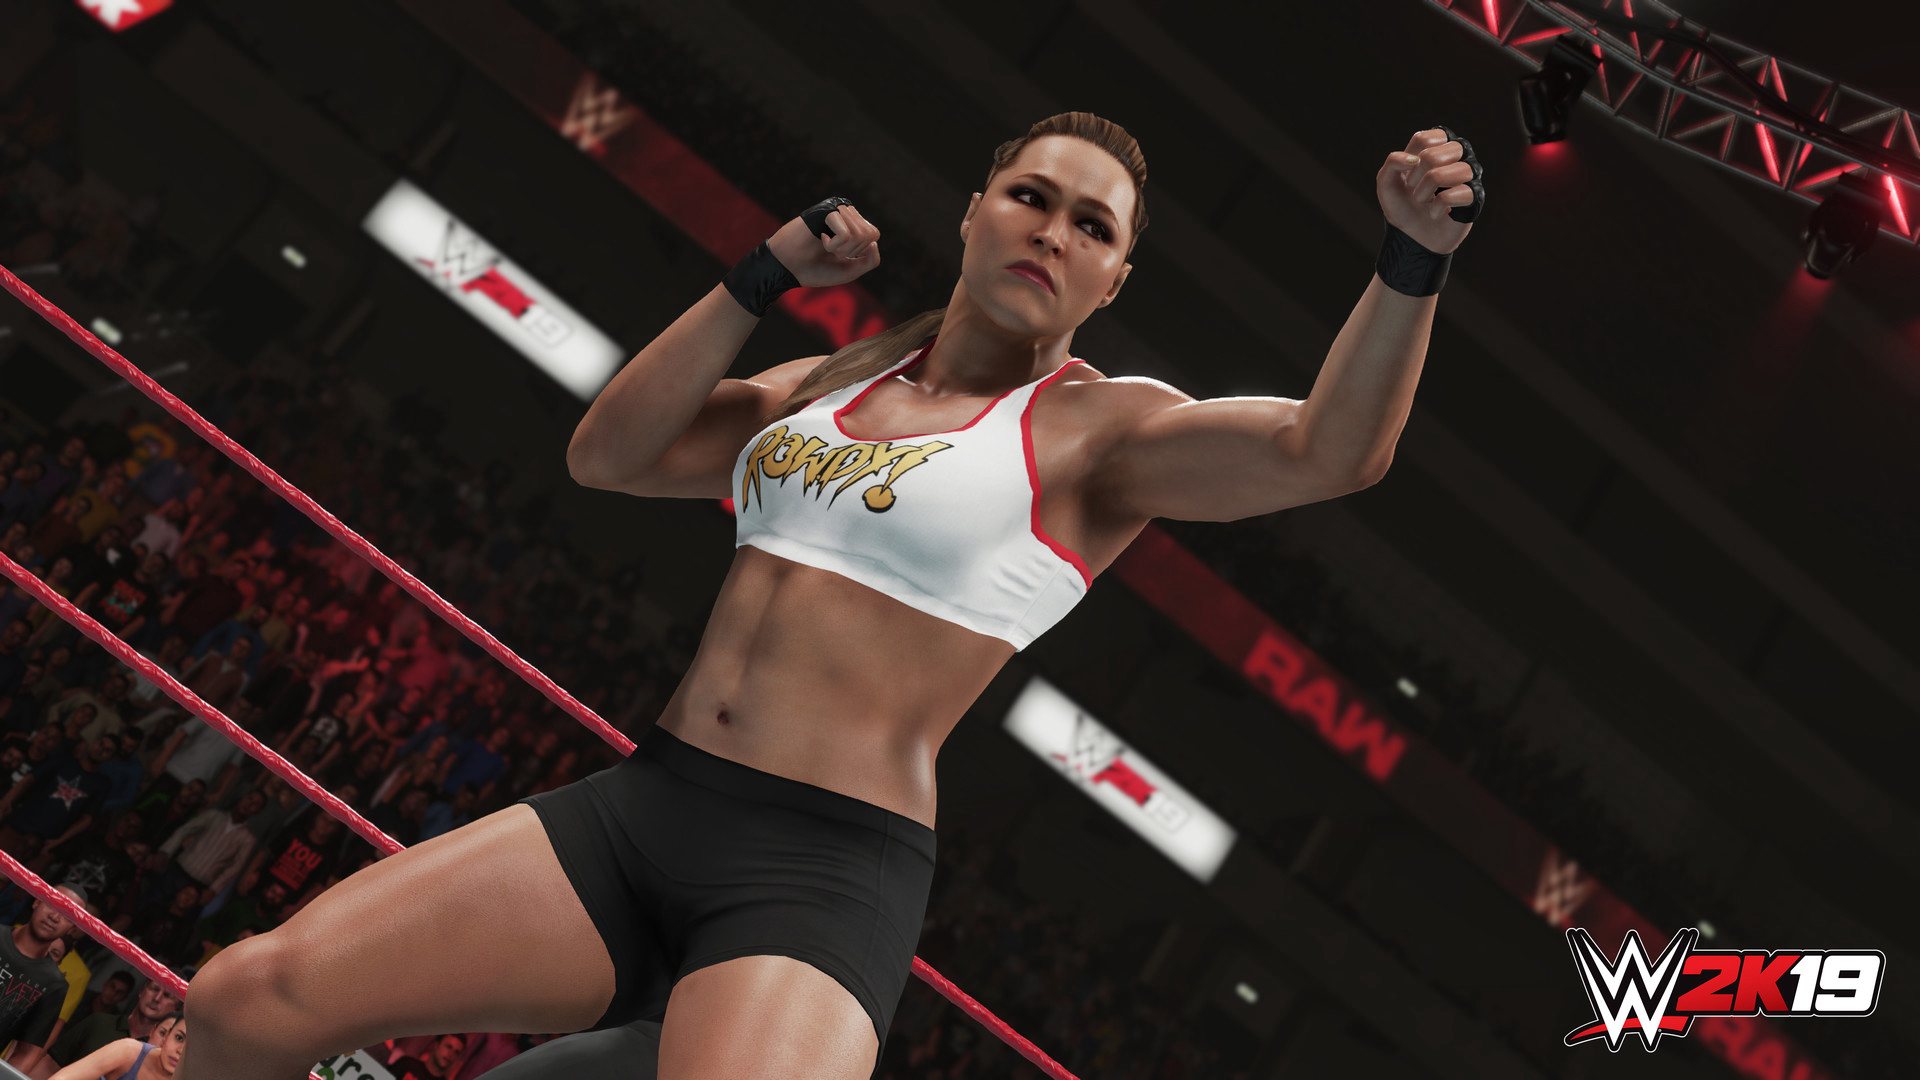 WWE 2K19 PlayStation 4 Account pixelpuffin.net Activation Link 15.81$